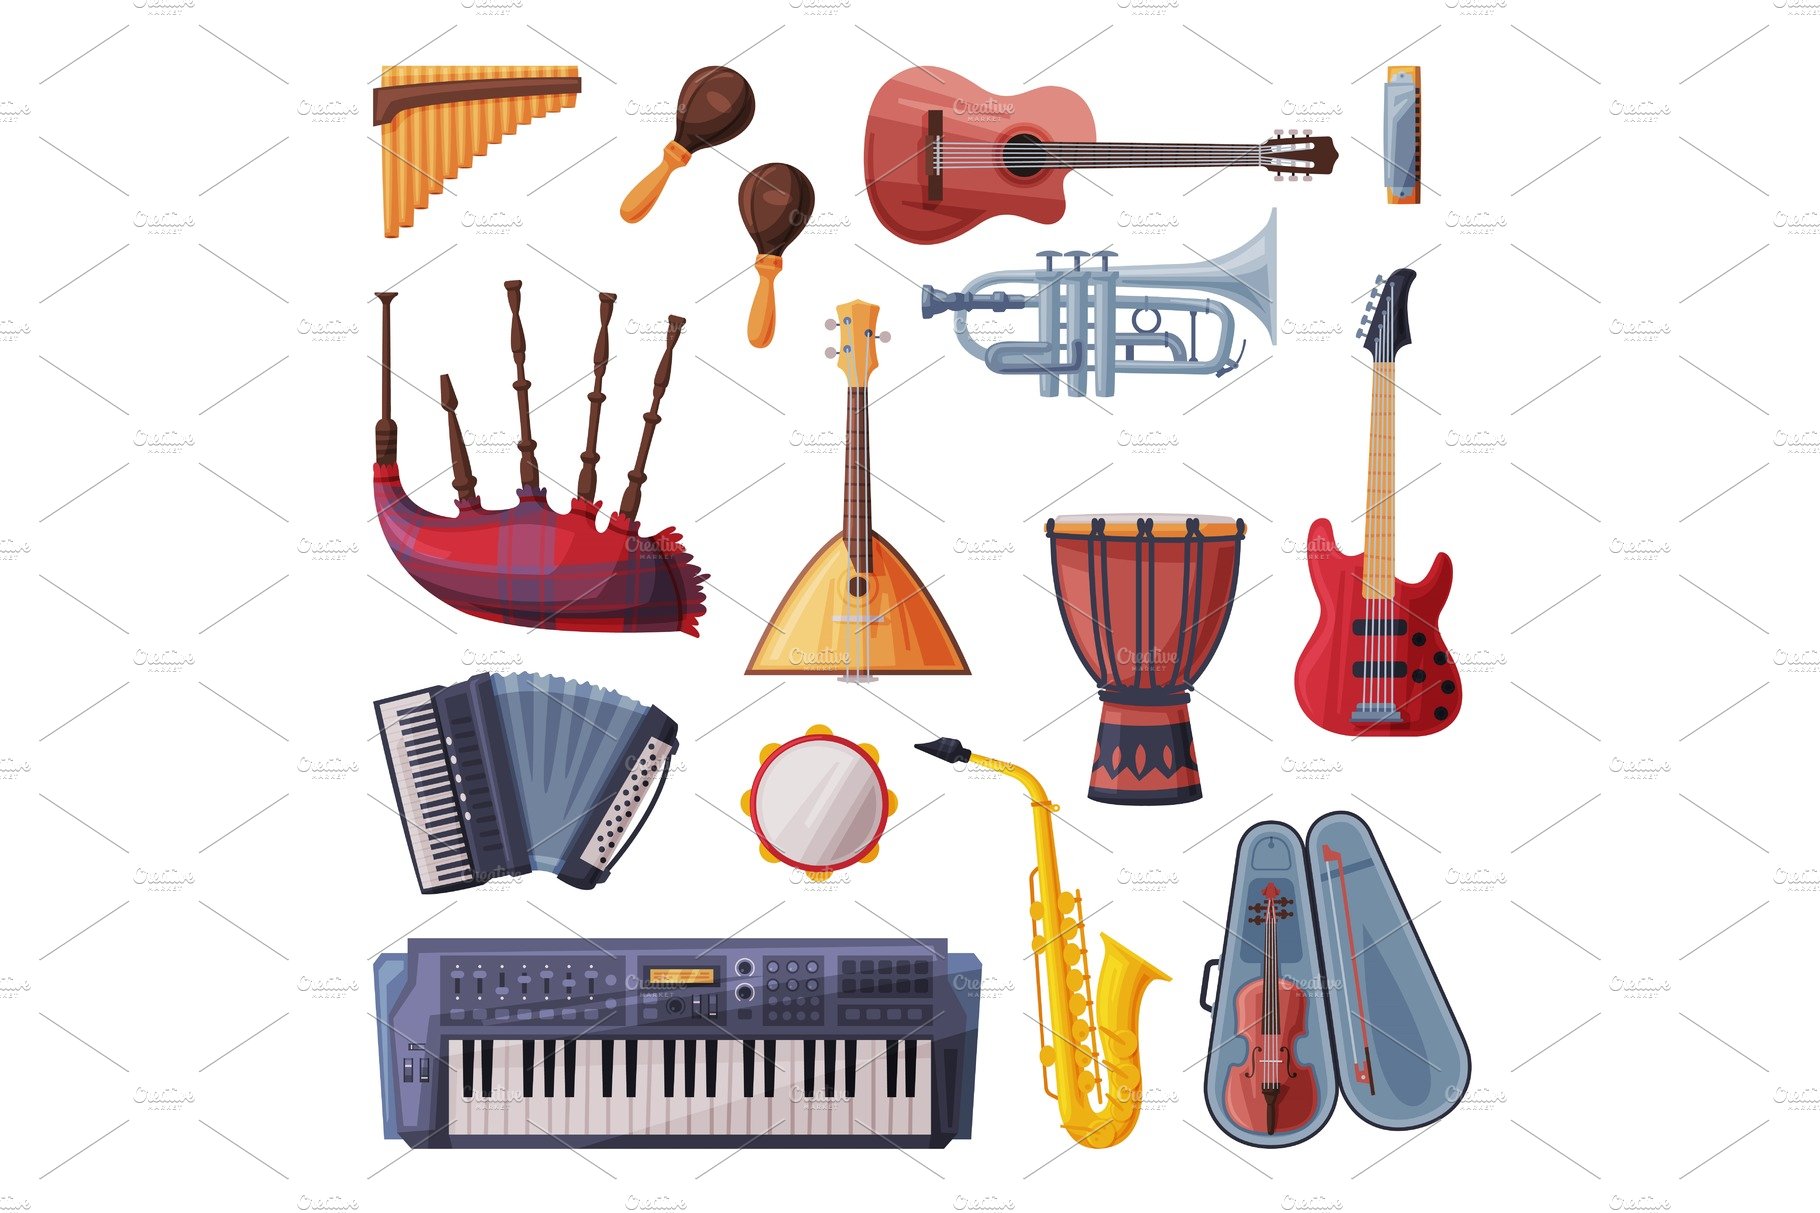 Musical Instruments Set, Cello cover image.